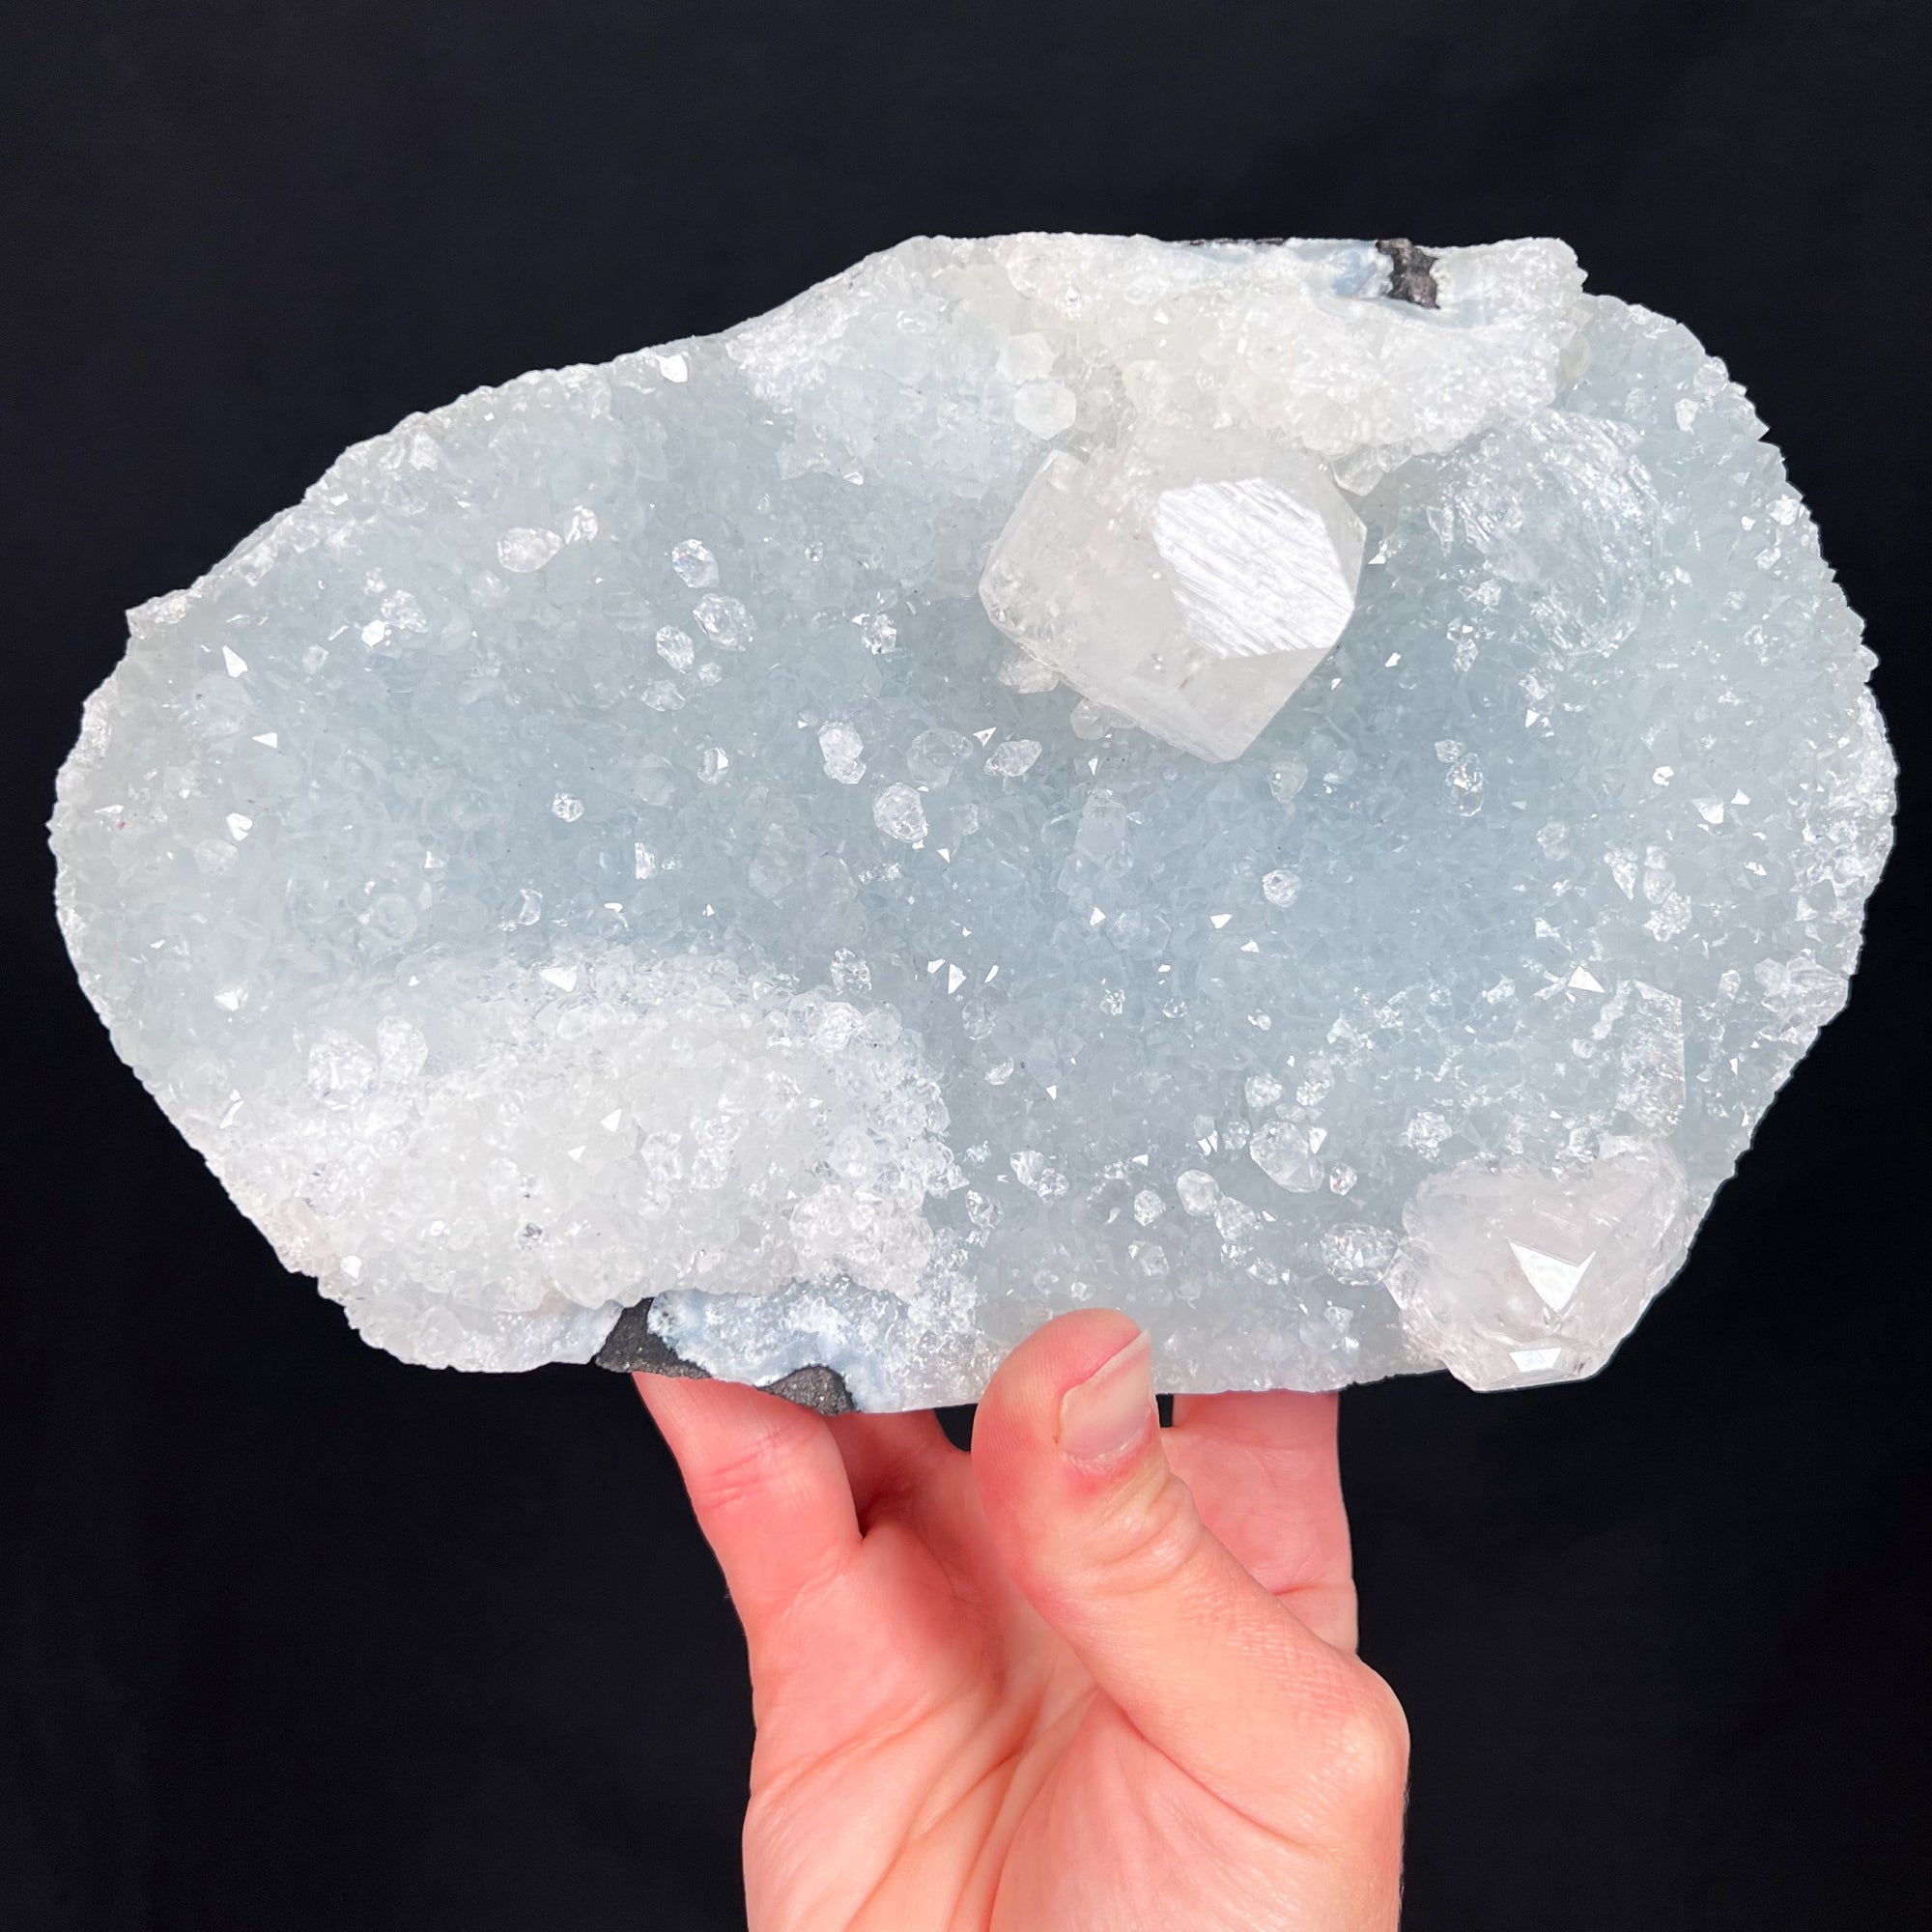 Clear Apophyllite Crystals on a Layer of Quartz and Chalcedony